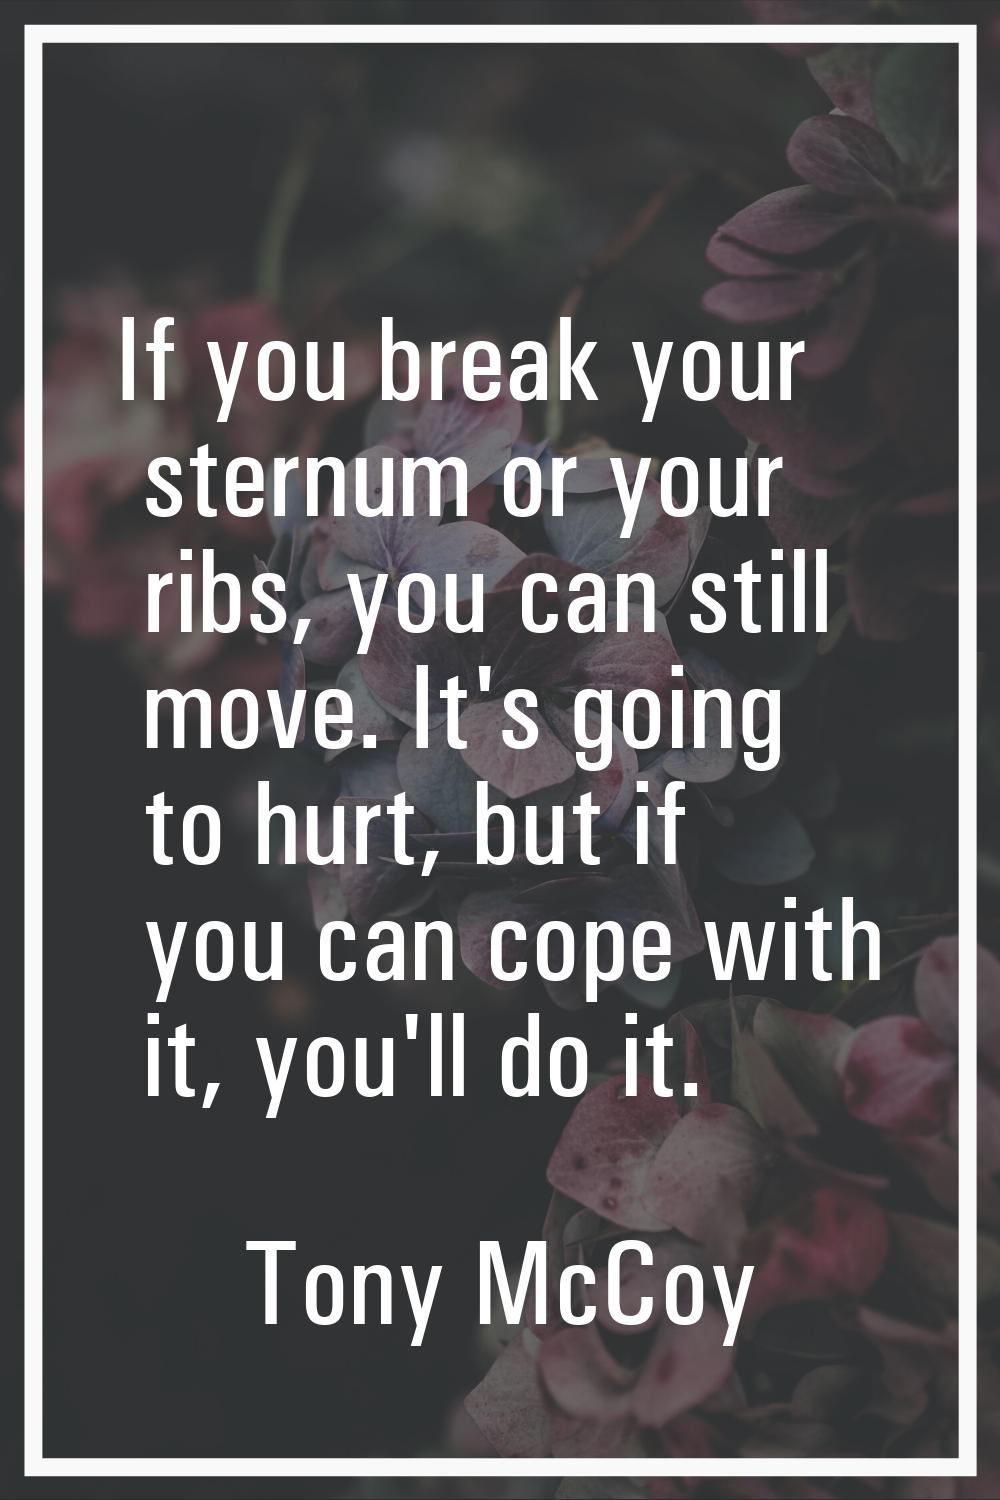 If you break your sternum or your ribs, you can still move. It's going to hurt, but if you can cope